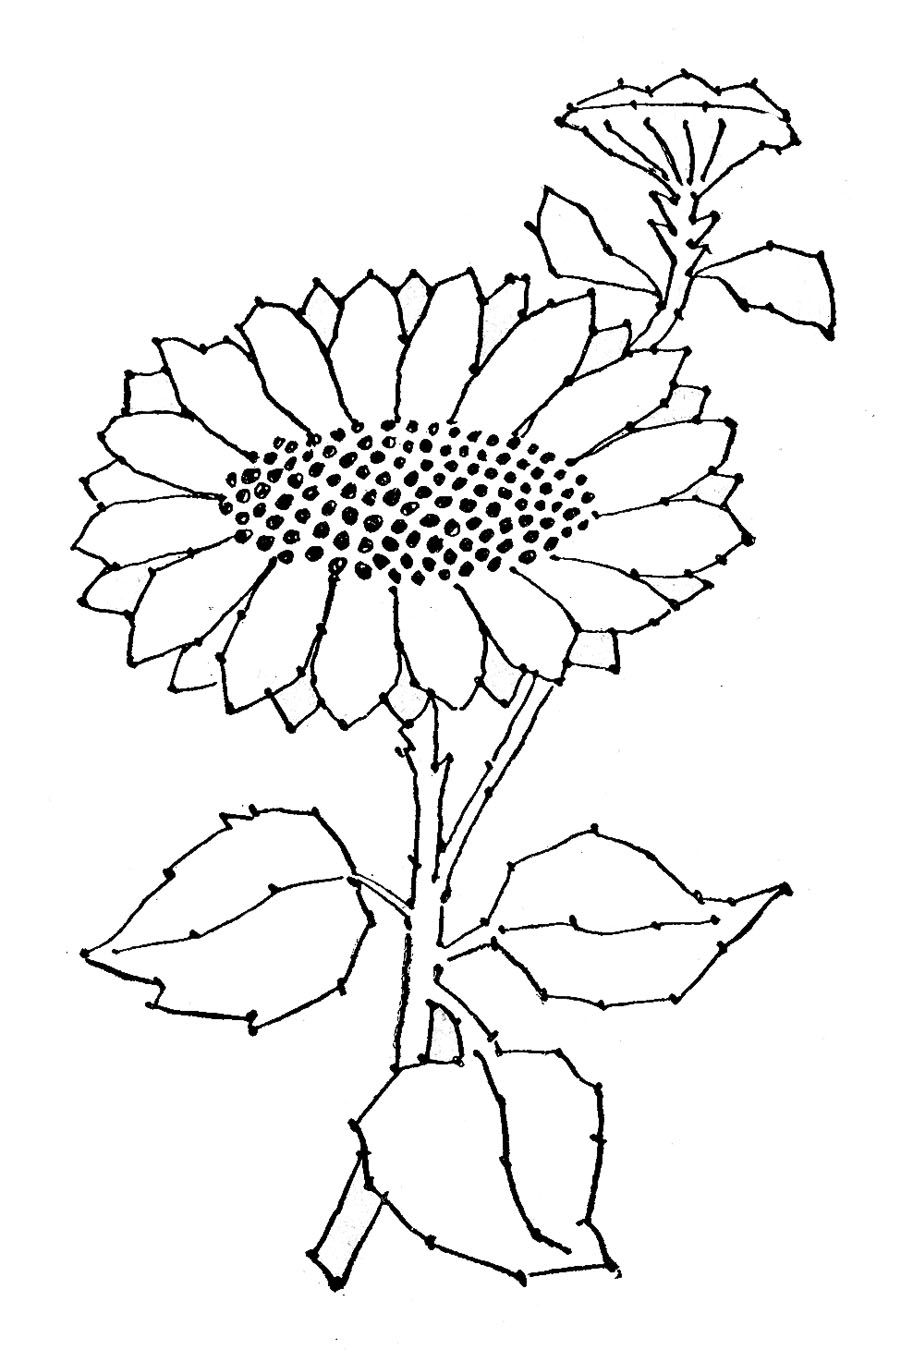 Embroidery Pattern   Sunflower Line Art   The Graphics Fairy